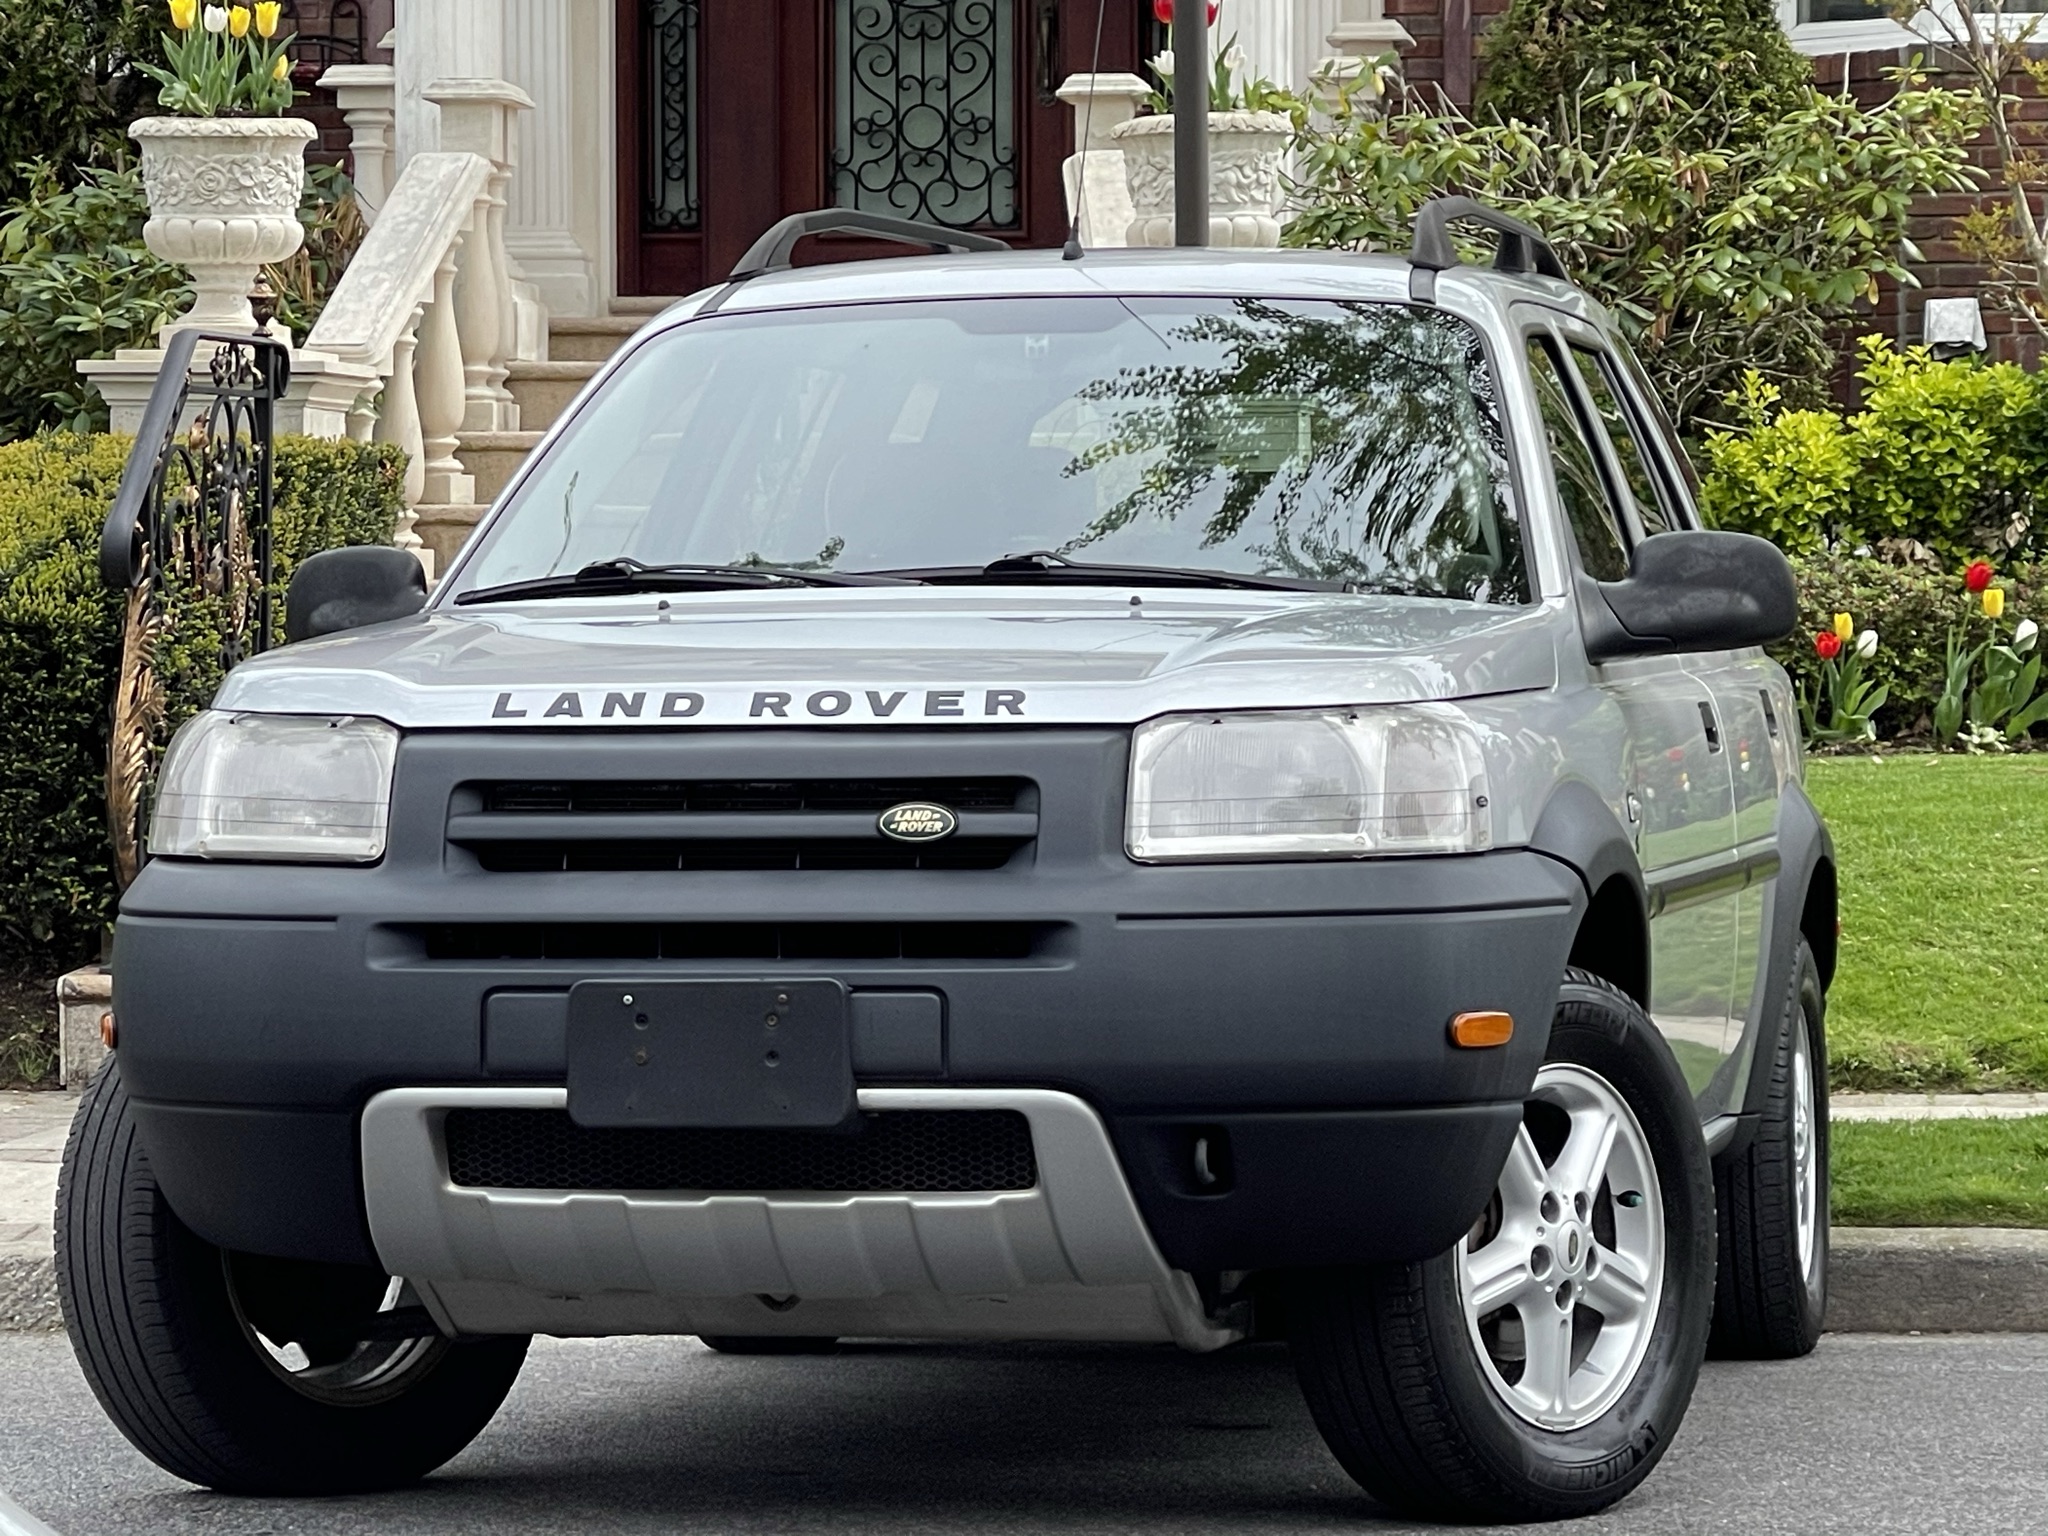 Buy Used 2002 LAND ROVER FREELANDER S for $8 900 from trusted dealer in  Brooklyn, NY!